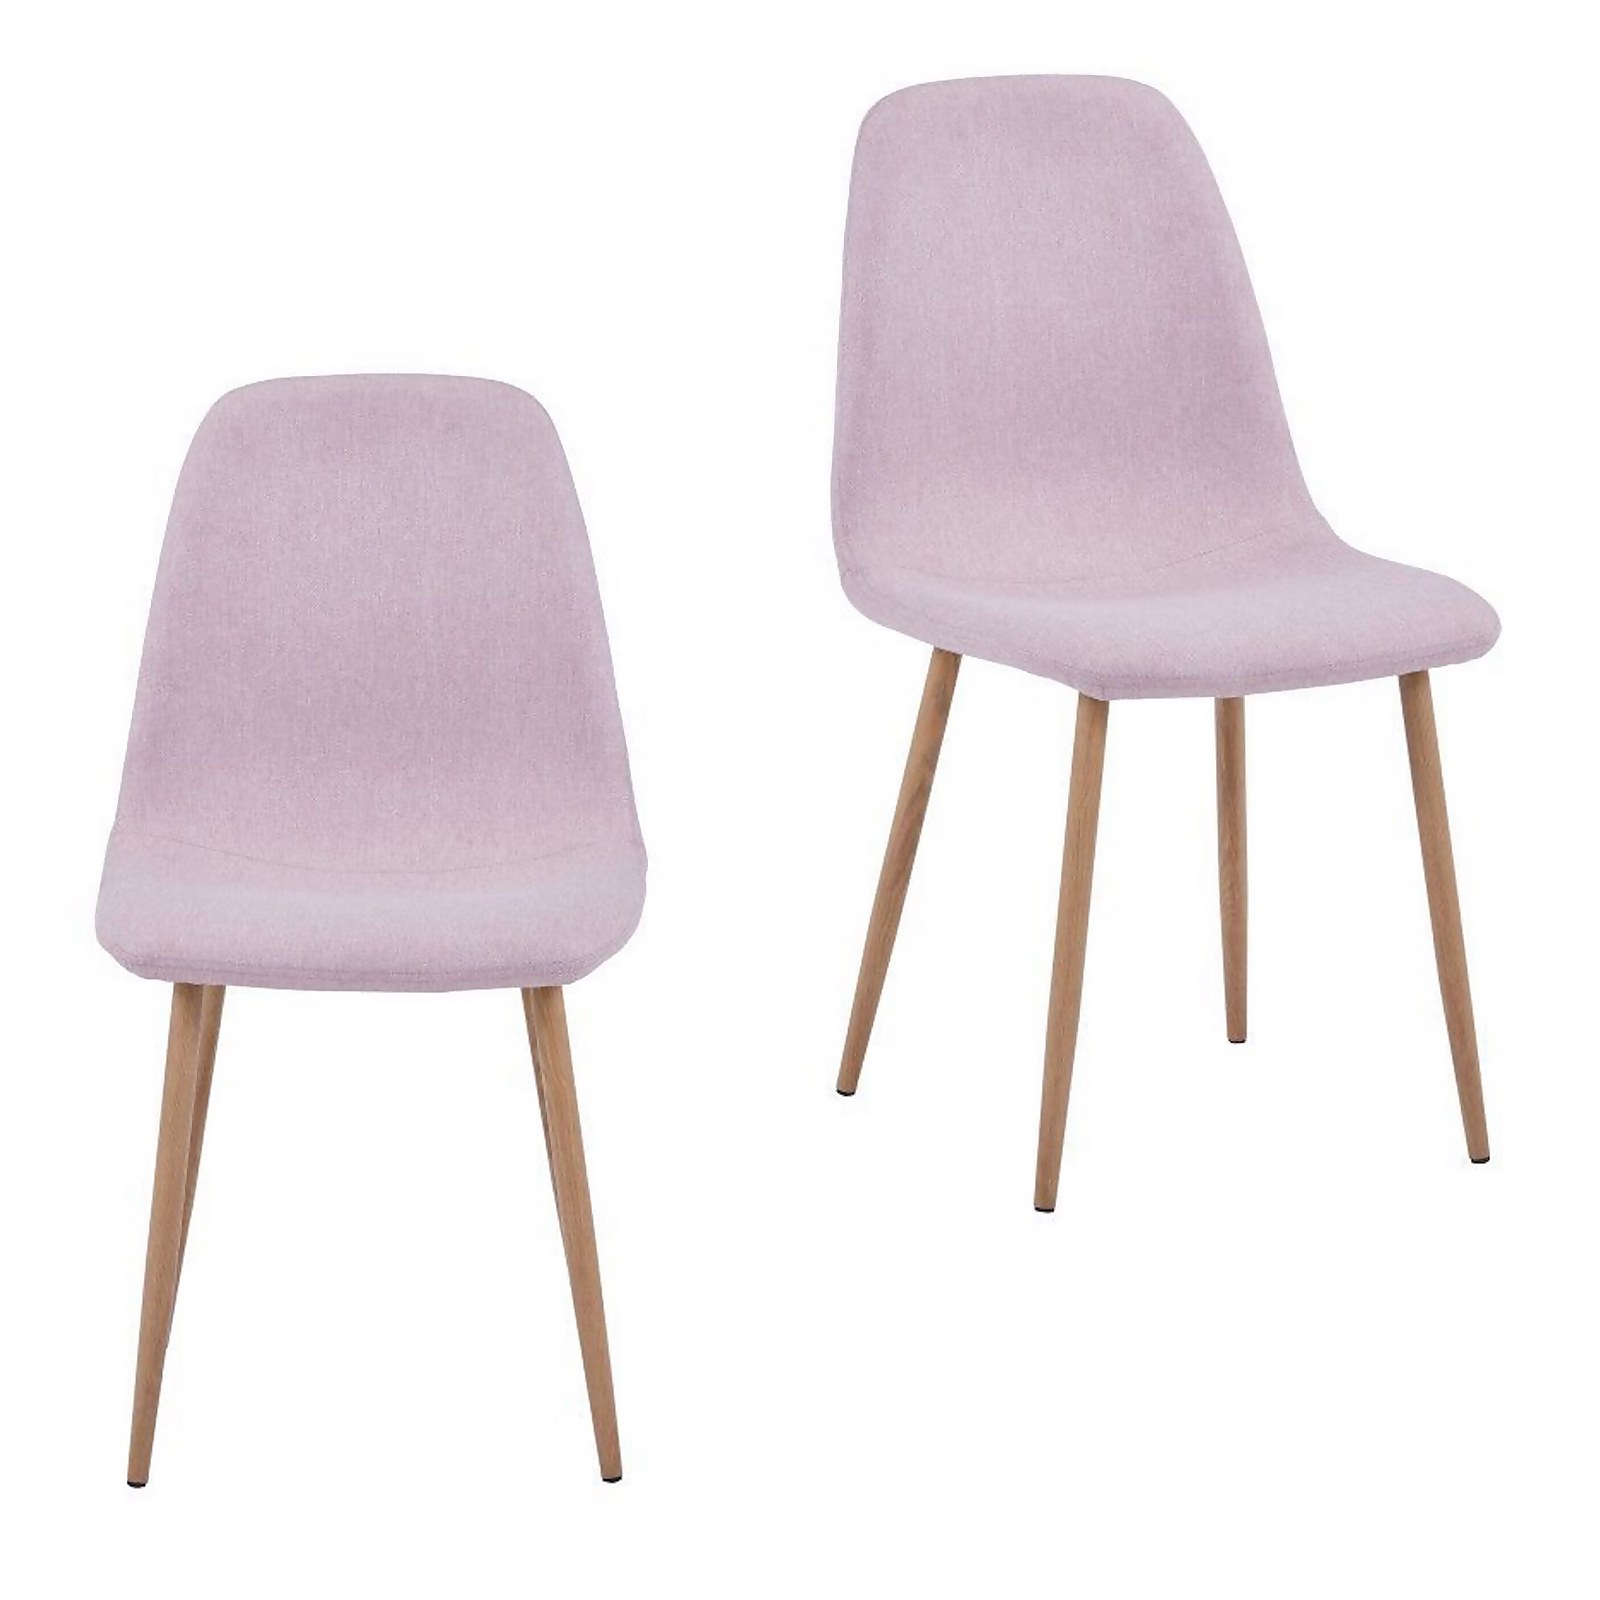 Photo of Ludlow Upholstered Dining Chair - Set Of 2 - Dusky Pink